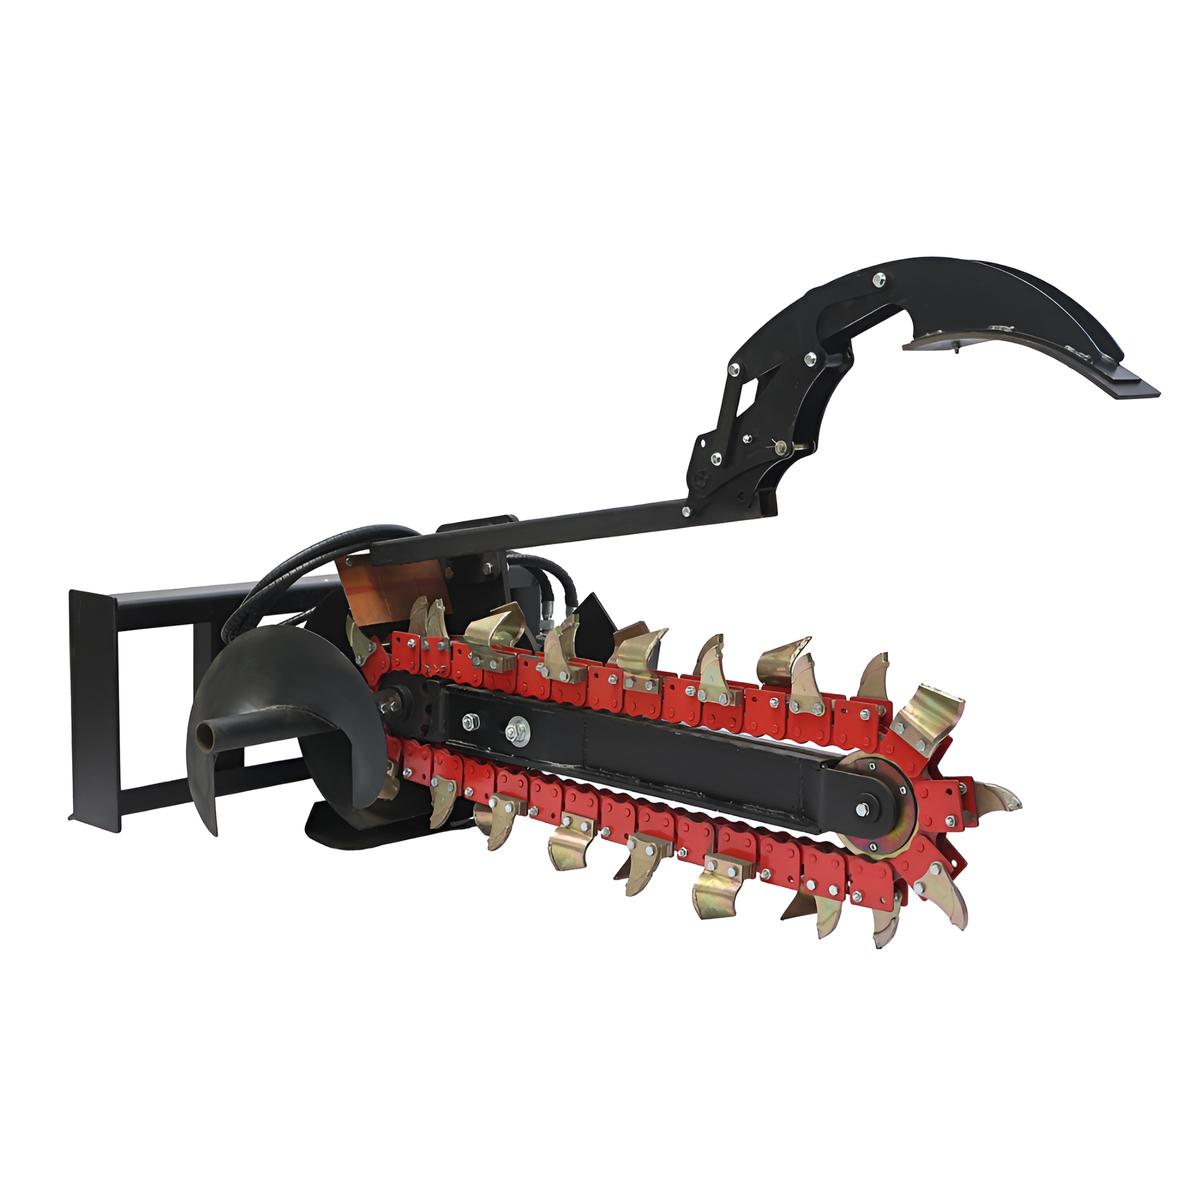 Value Industrial Skid Steer Trencher - 900mm trenching width - 200mm trenching depth